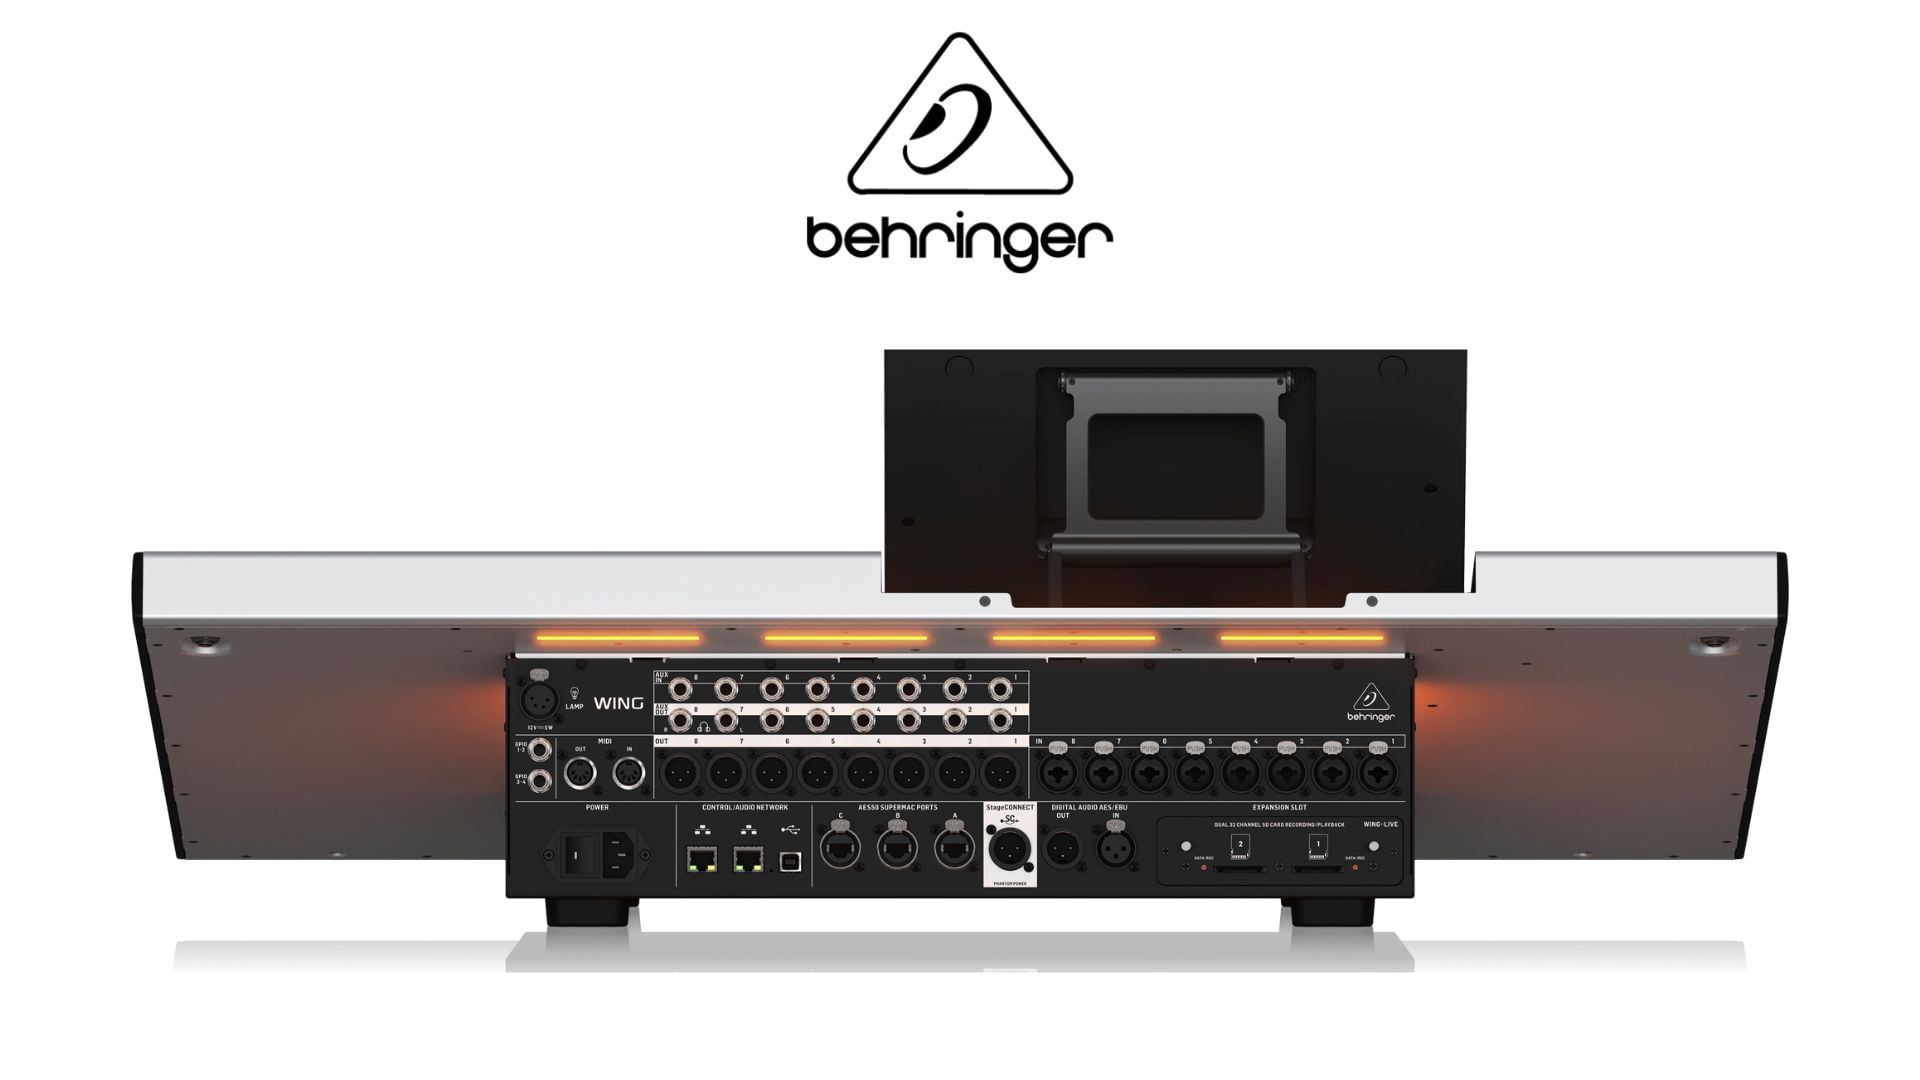 Behringer unveils plans for nearly 100 exciting new products